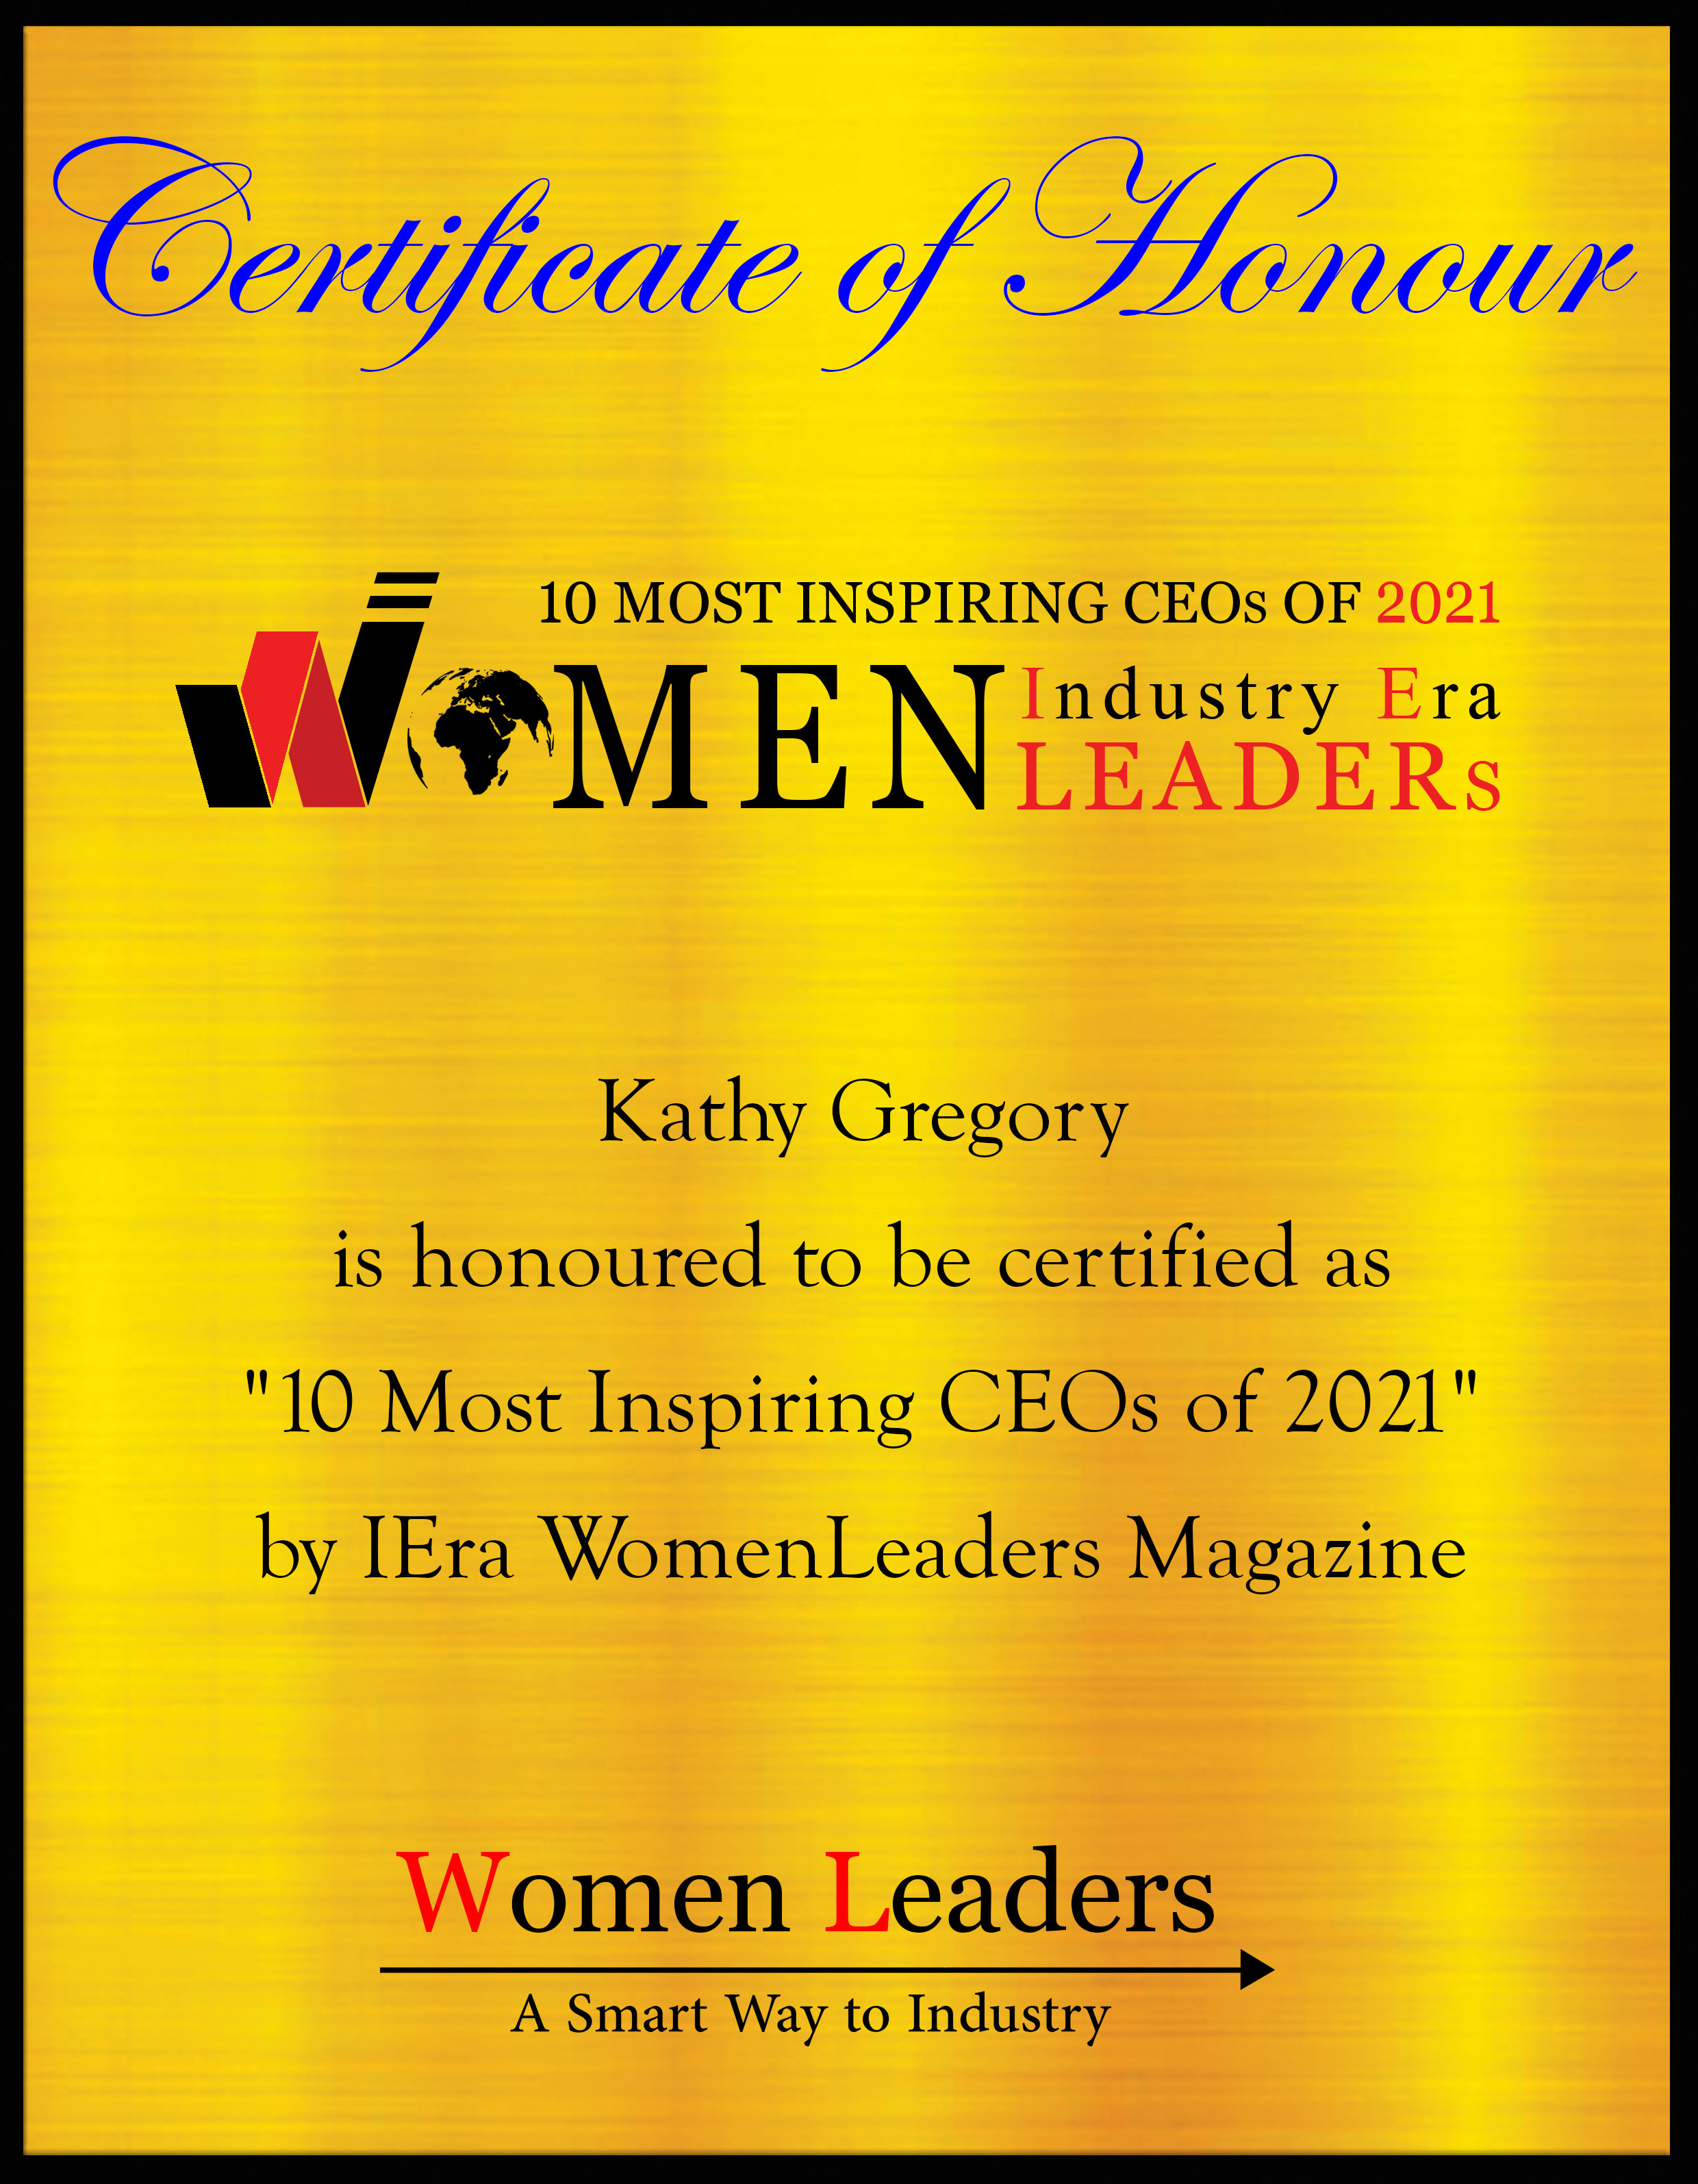 Kathy Gregory, Founding President & CEO of Paradigm Quest, Most Inspiring CEOs of 2021